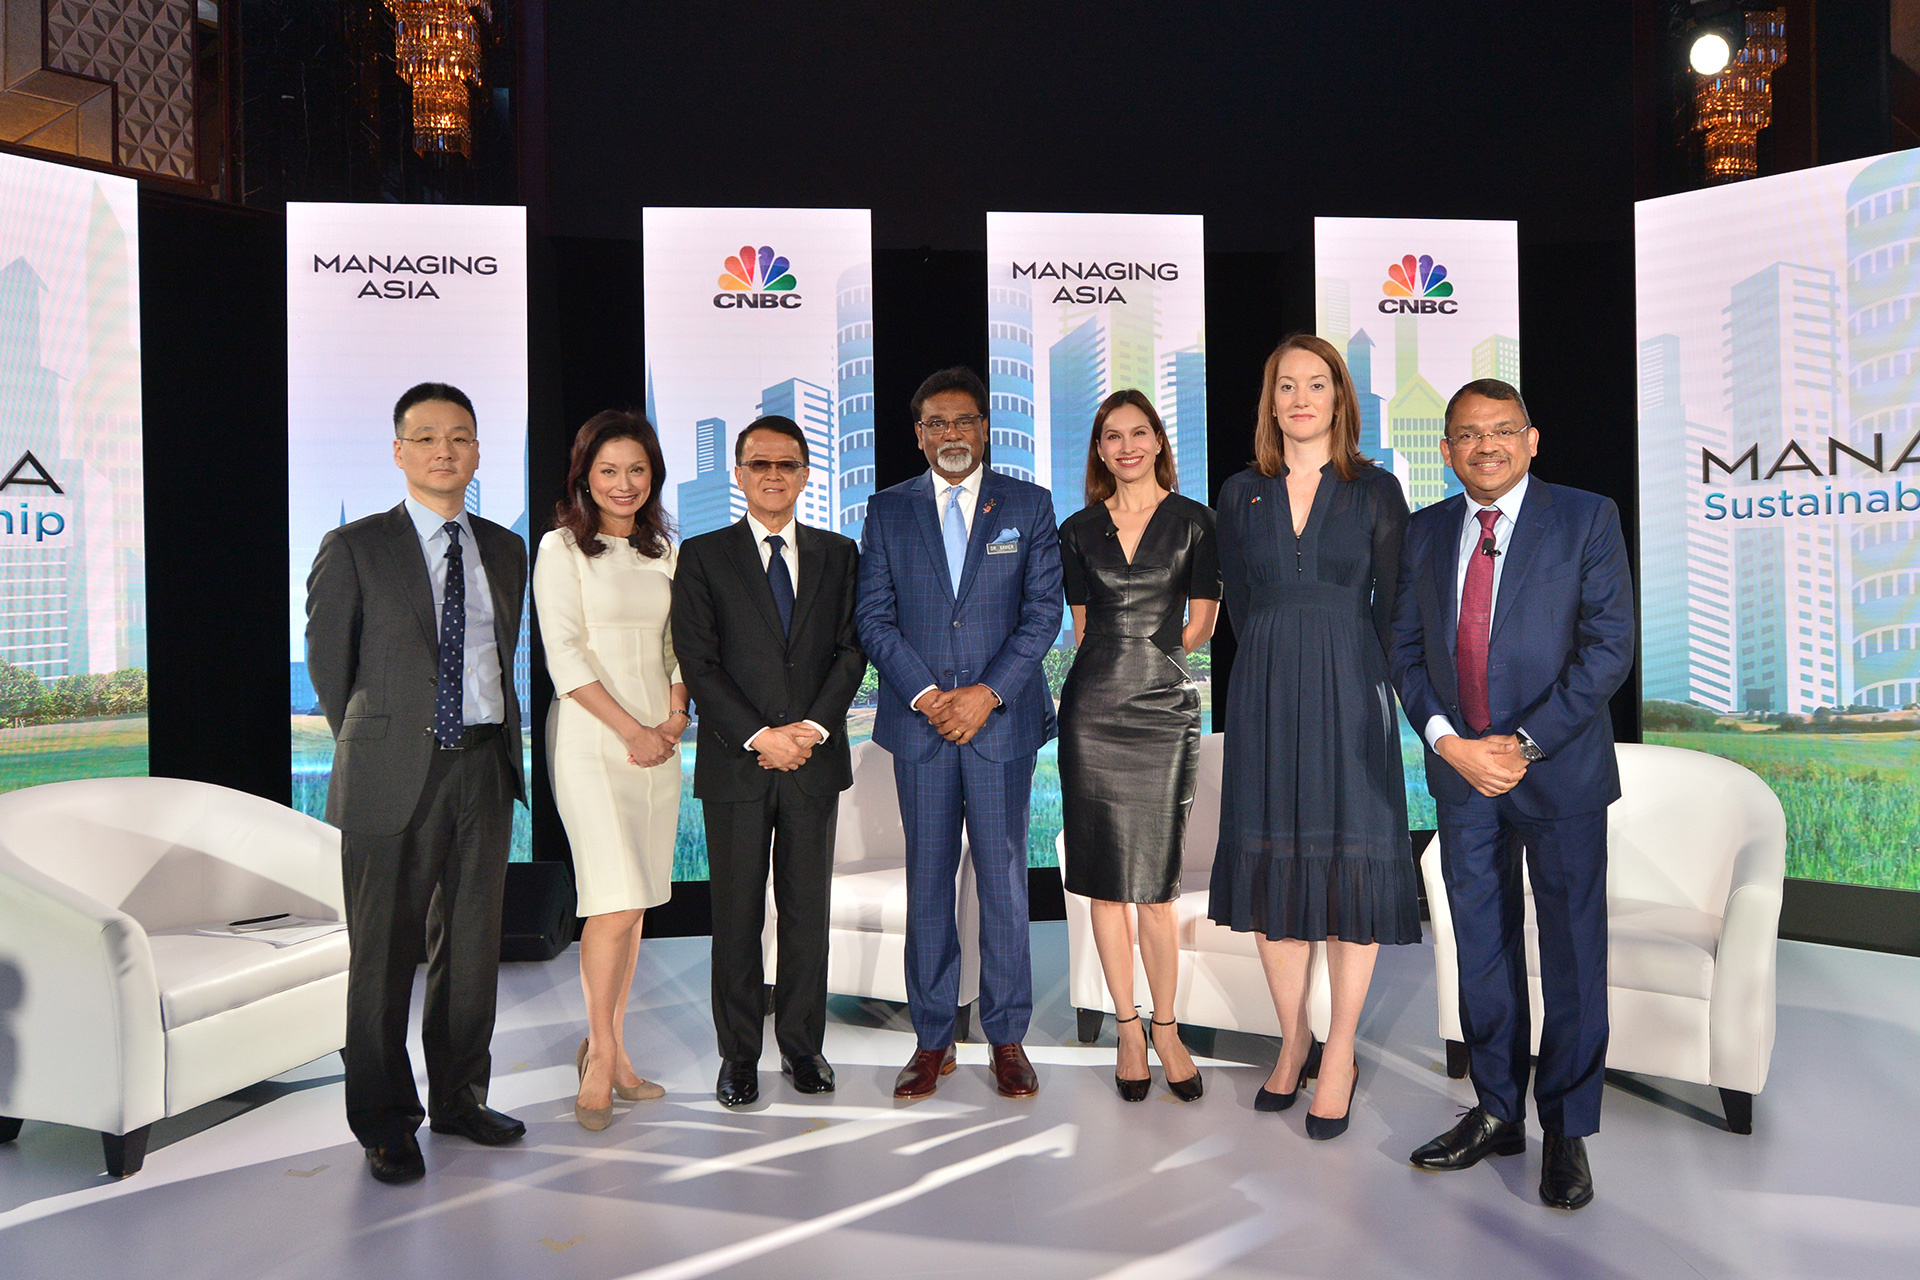 Sunway City Kuala Lumpur Hosts CNBC’s First Sustainability Themed Managing Asia Show in Malaysia